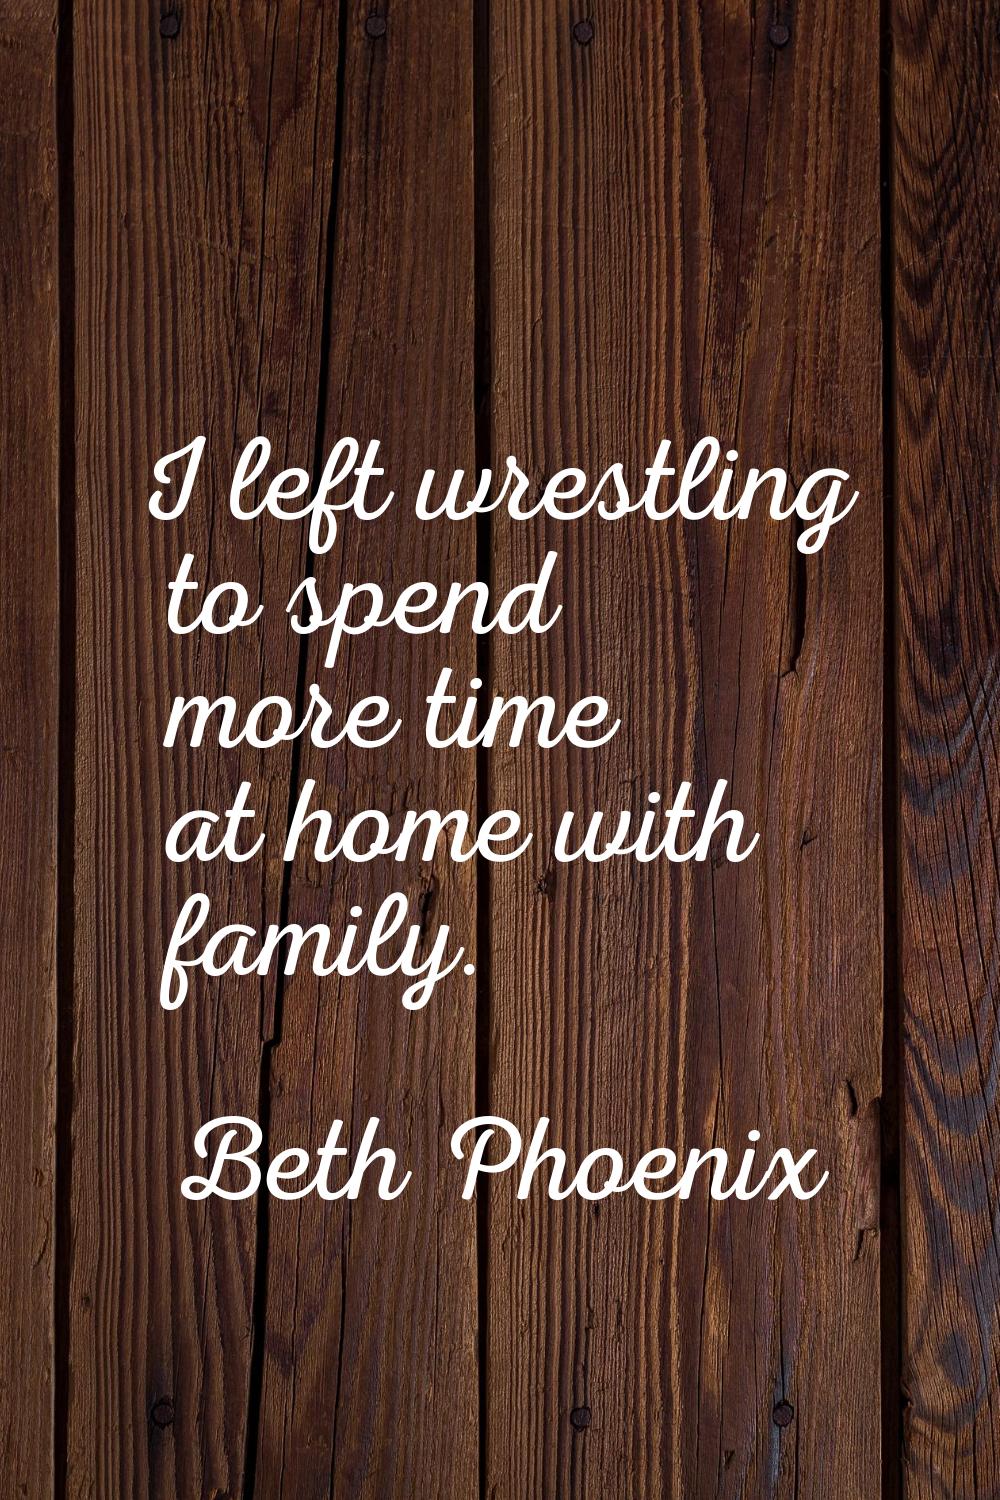 I left wrestling to spend more time at home with family.